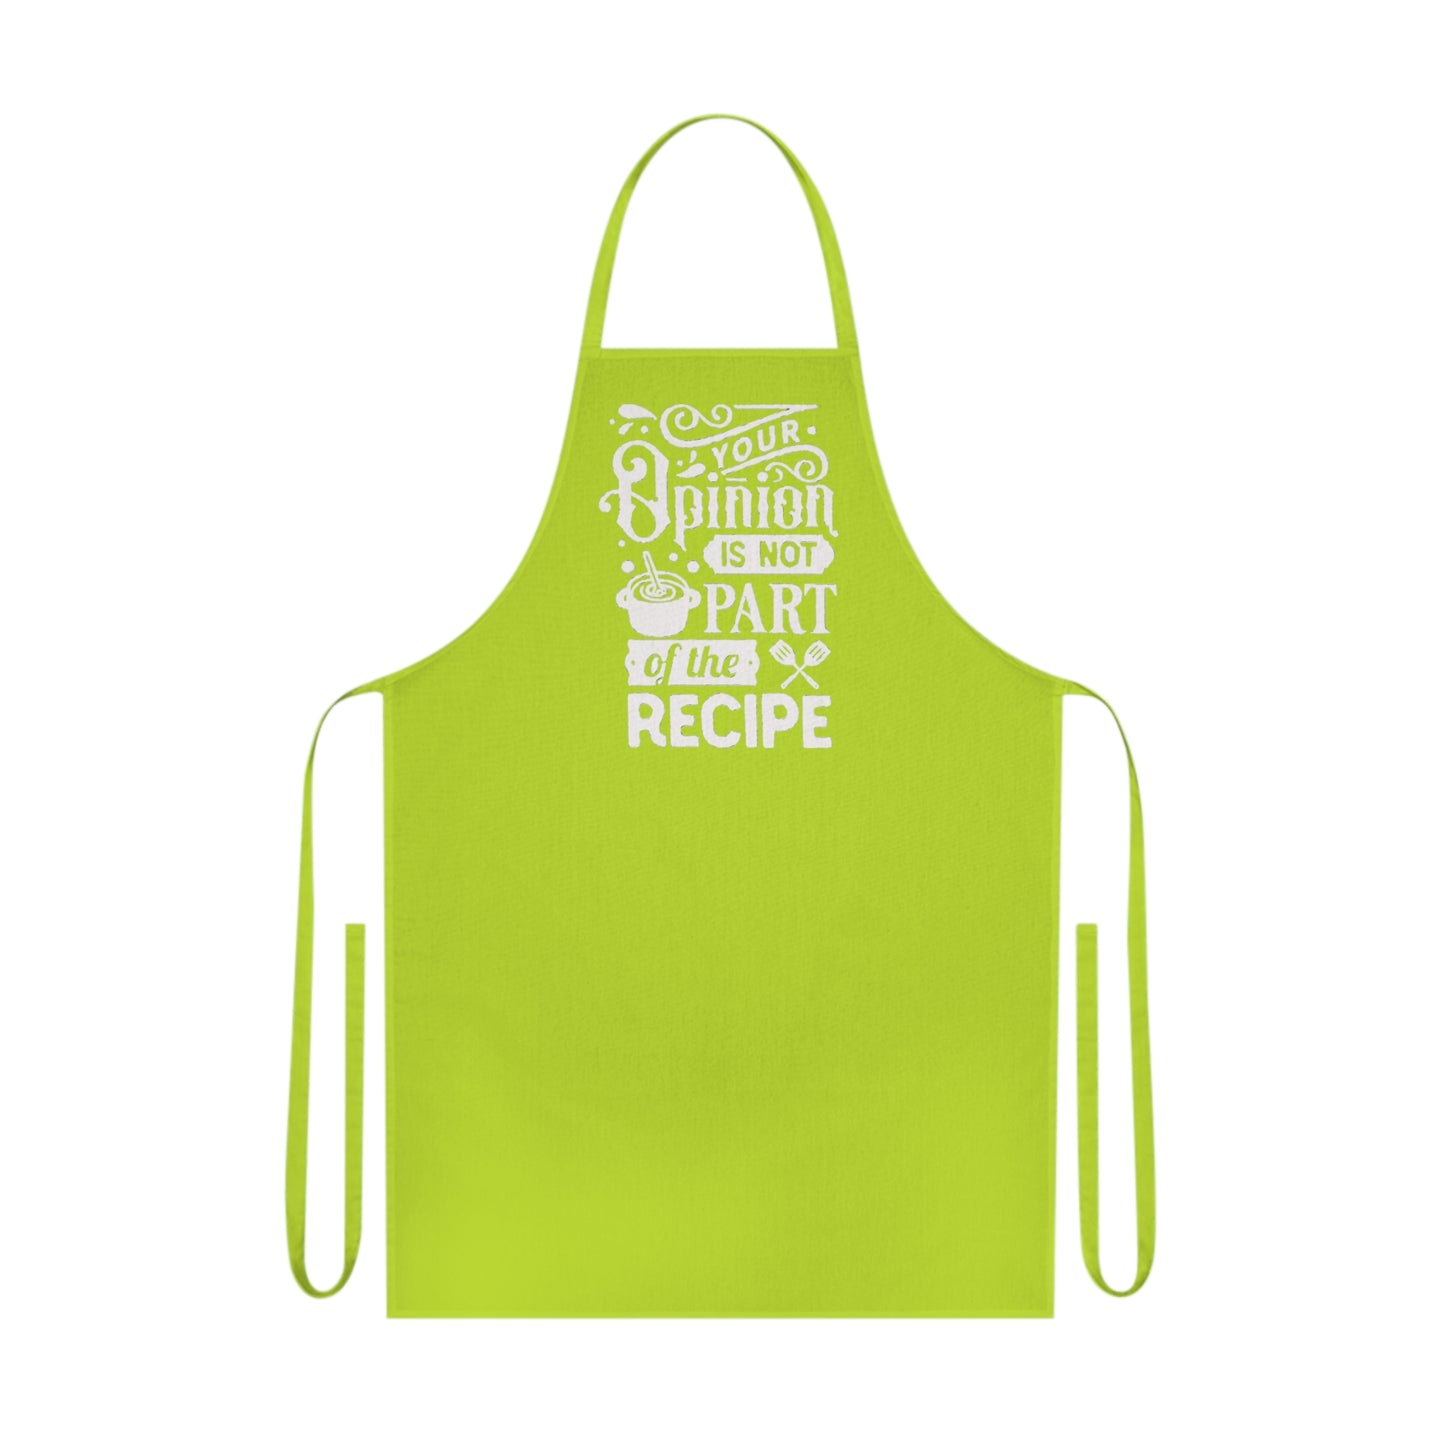 Your Opinion Is not Part of the Recipe. Cotton Apron